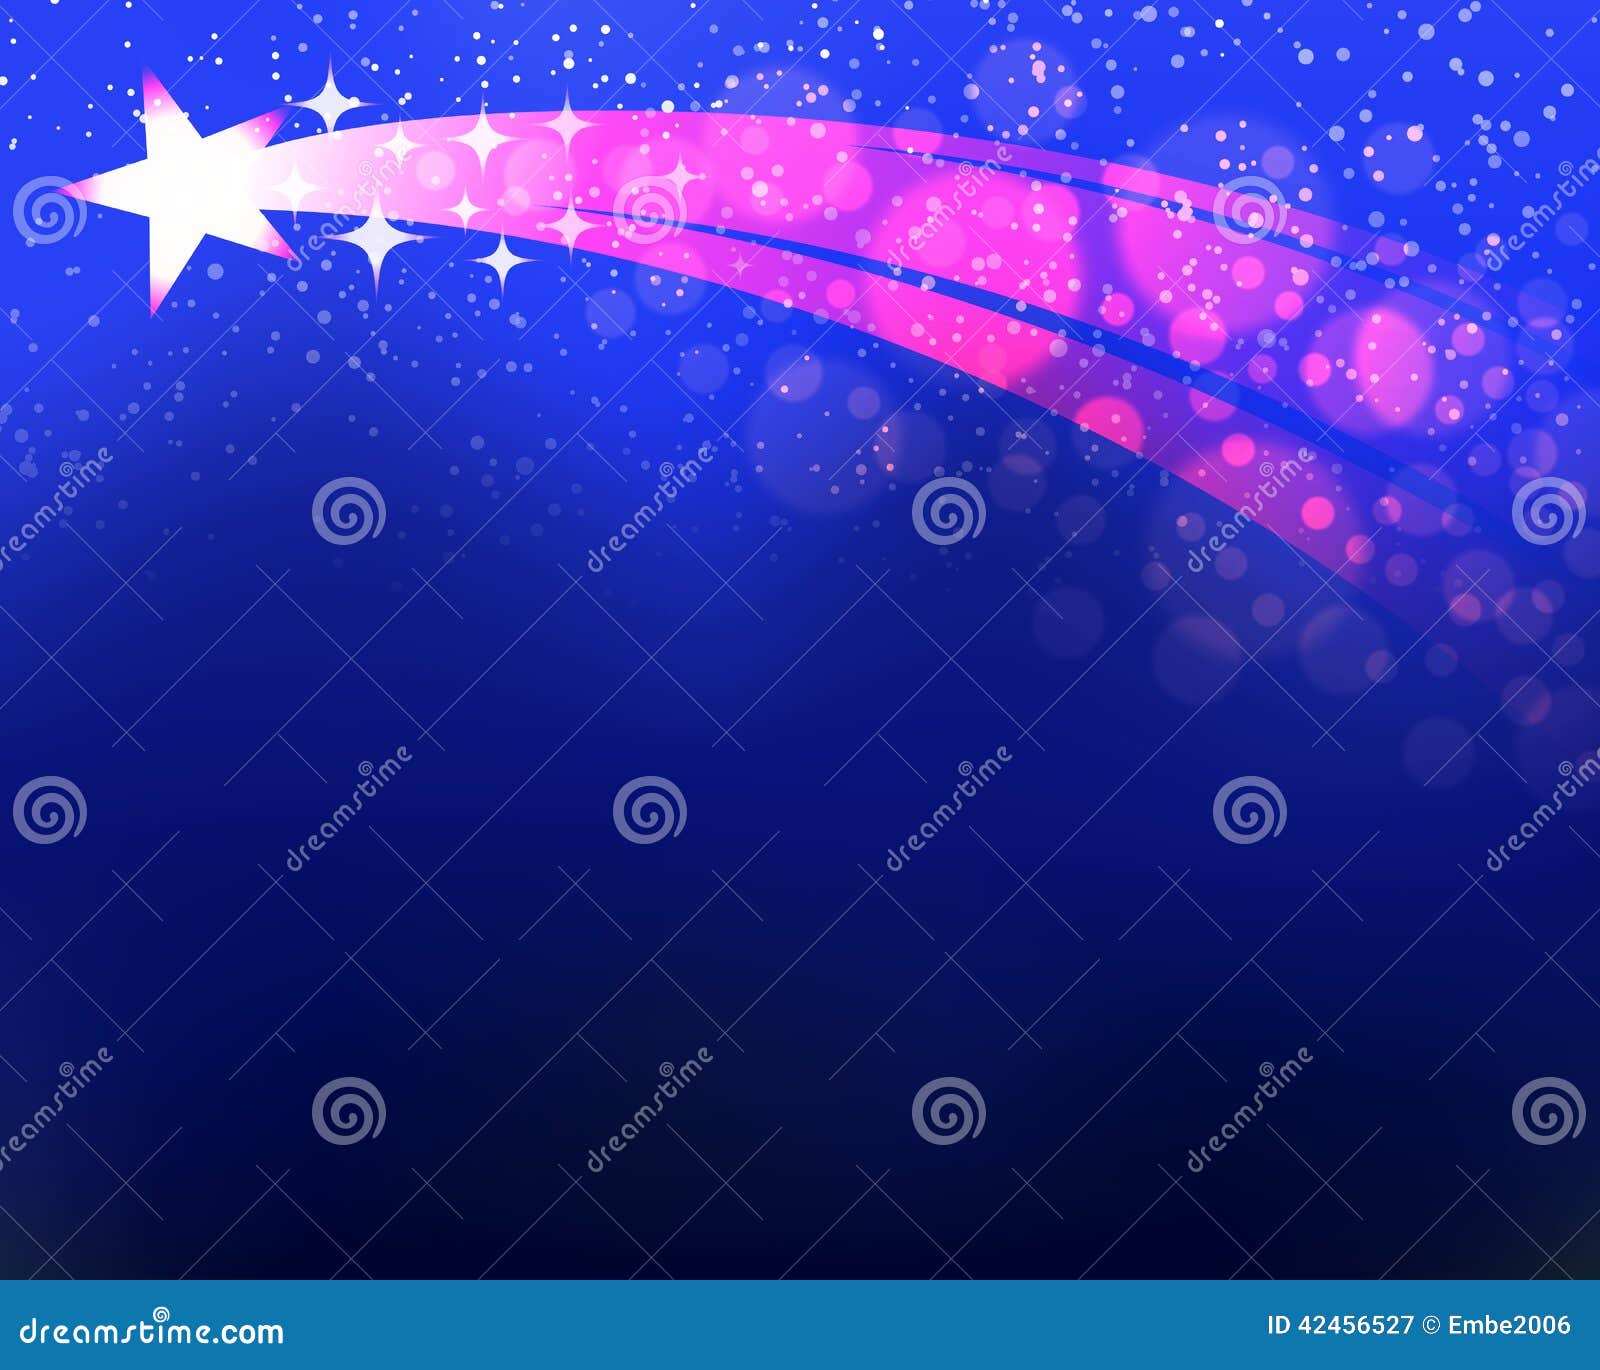 shooting star background